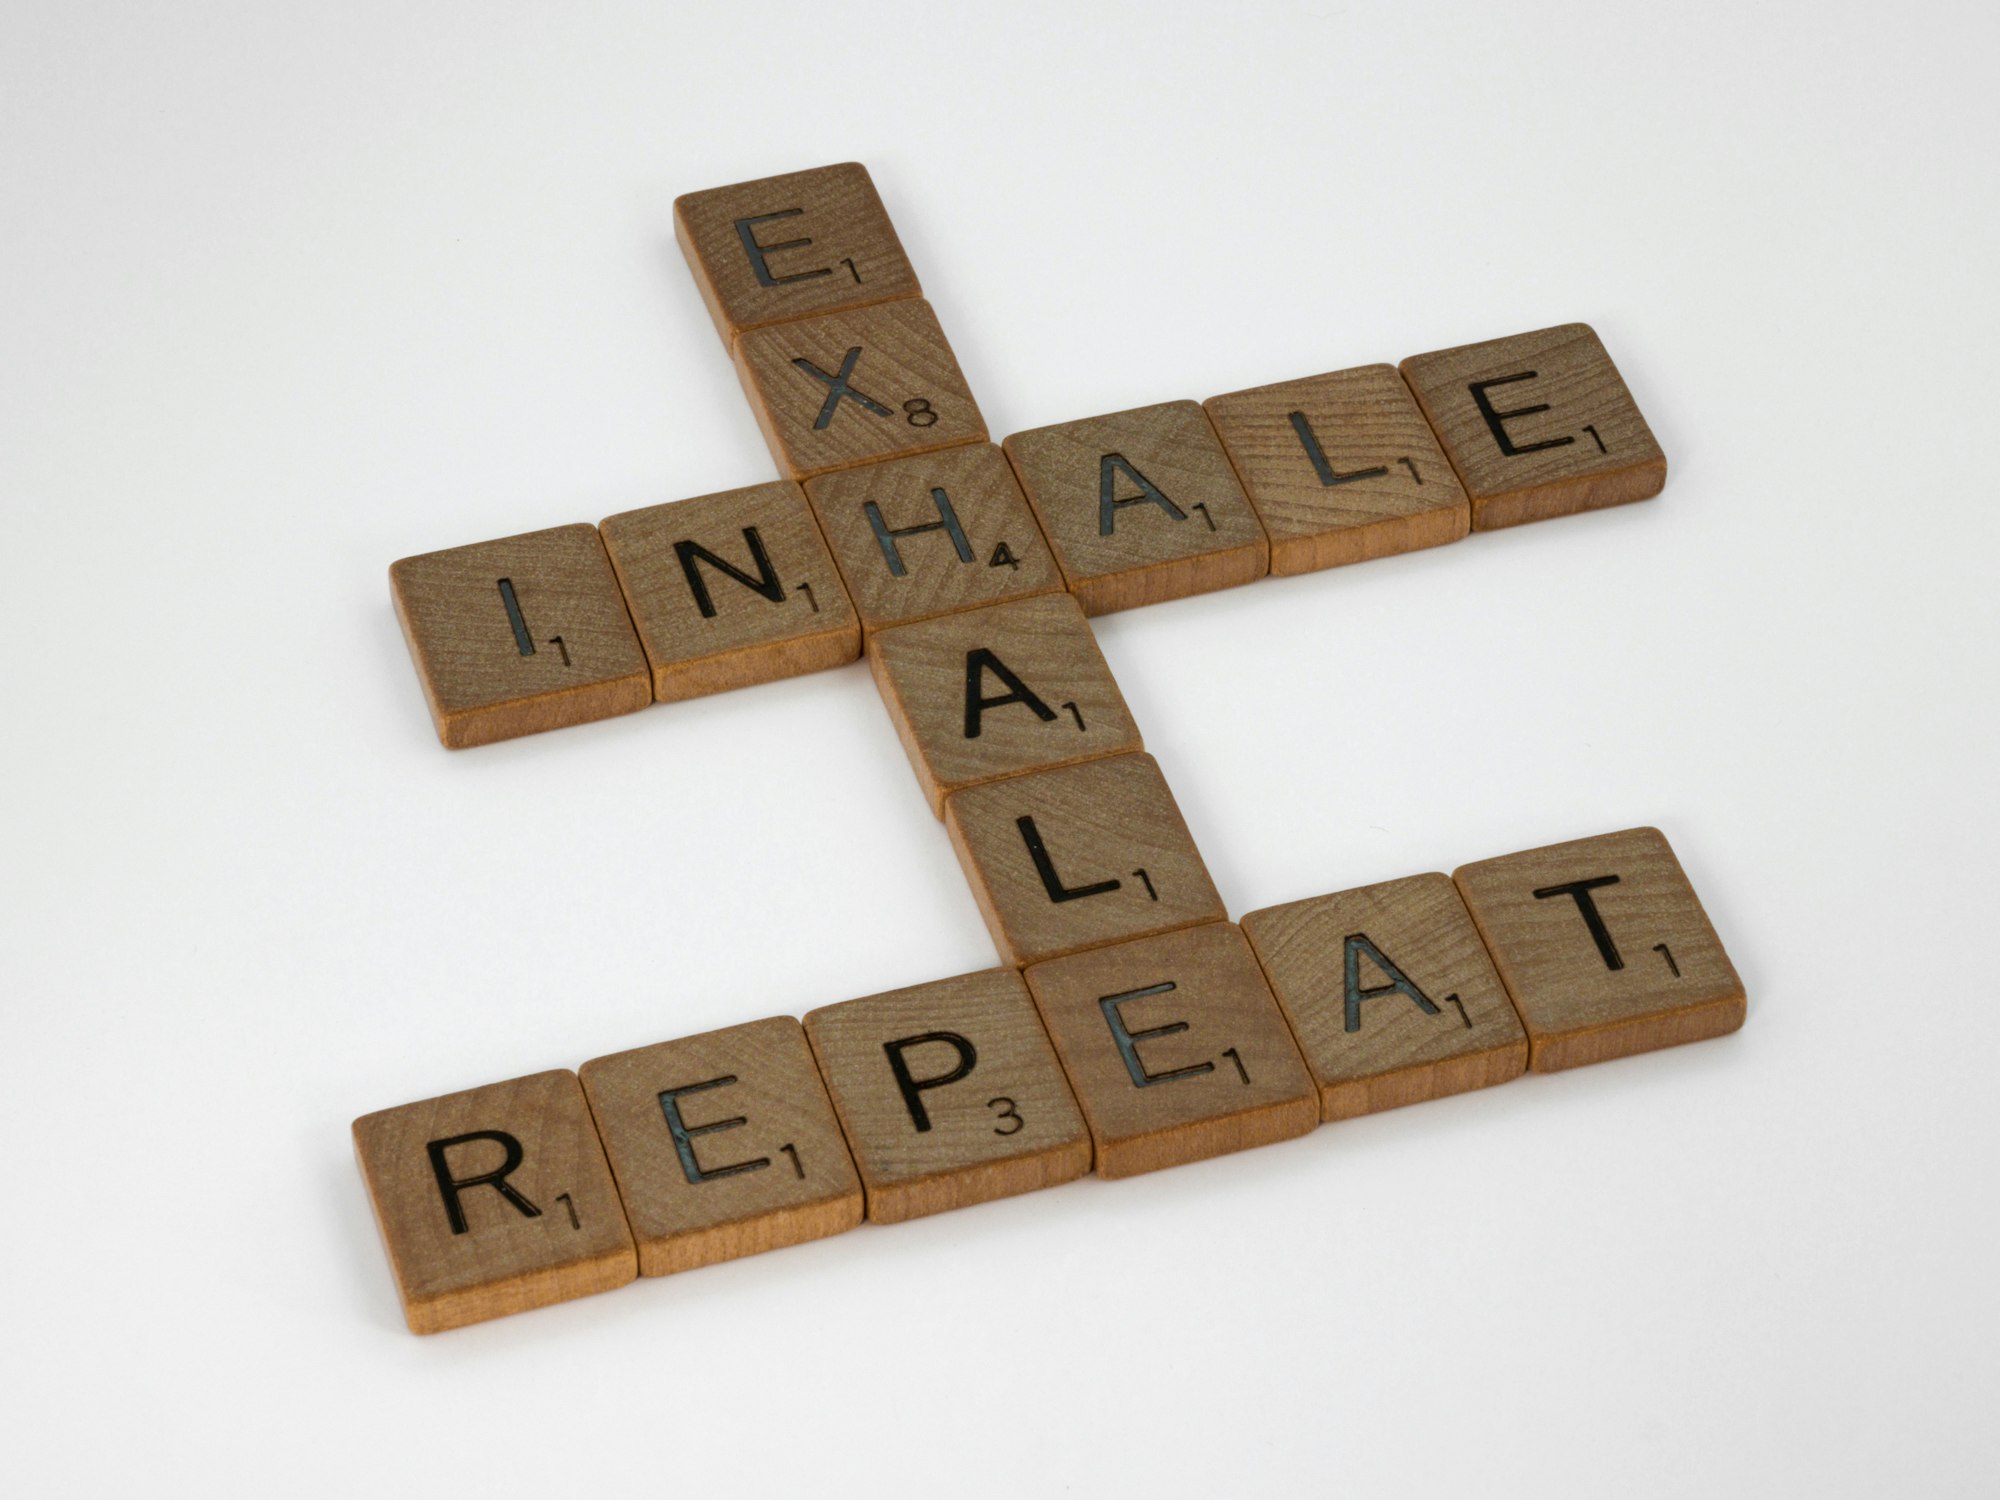 scrabble, scrabble pieces, lettering, letters, wood, scrabble tiles, white background, words, quote, letters, type, typography, design, layout, focus, bokeh, blur, photography, images, image, inhale, exhale, repeat, keep going, breathe, life rhythm, relax, persistence, perspective, endurance, pause, 